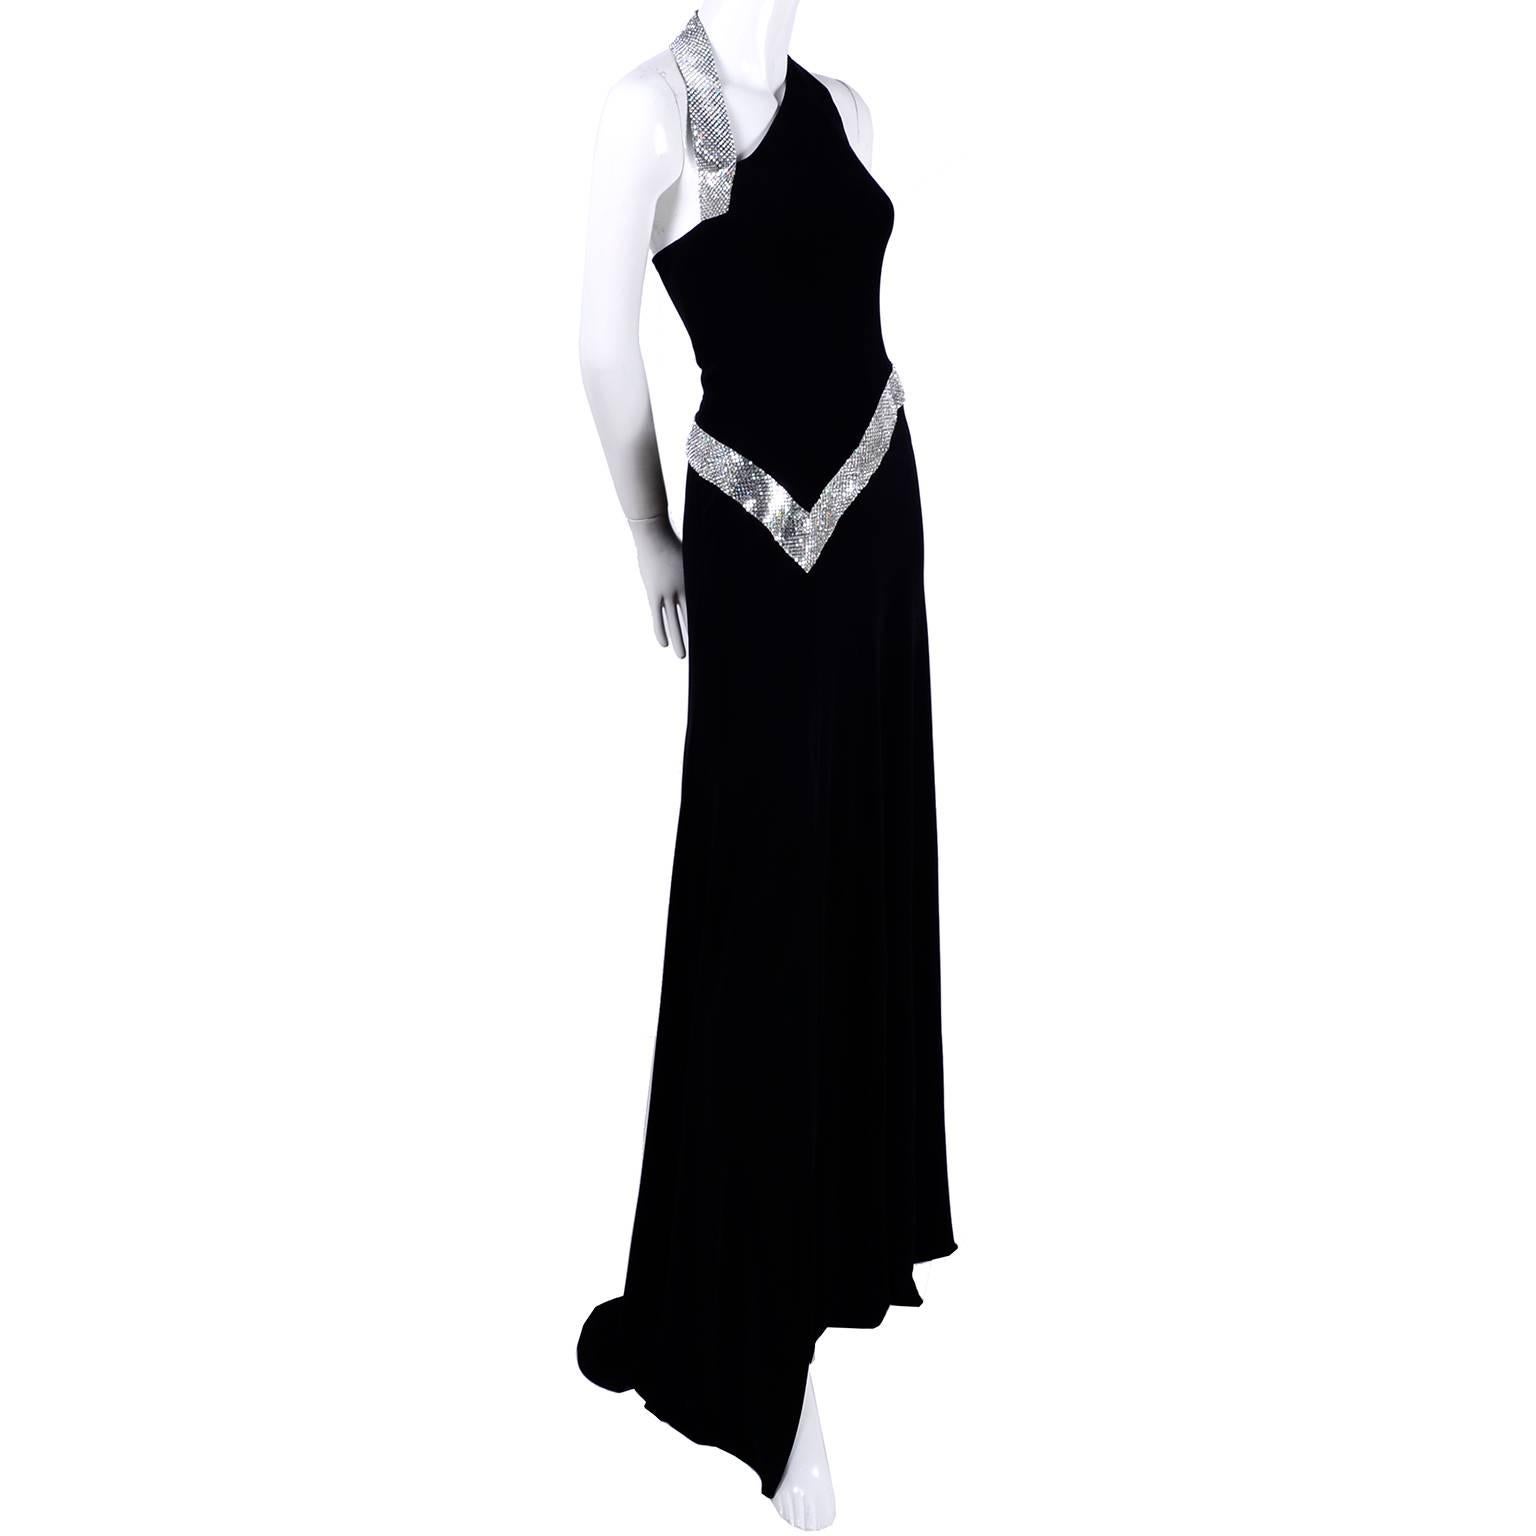 This is a show stopping vintage dress from Jiki of Monte Carlo that was made in France in the 1990's. The dress is black crepe with a thigh high slit and is trimmed with absolutely gorgeous silver mesh alternated with crystal clear rhinestones. We